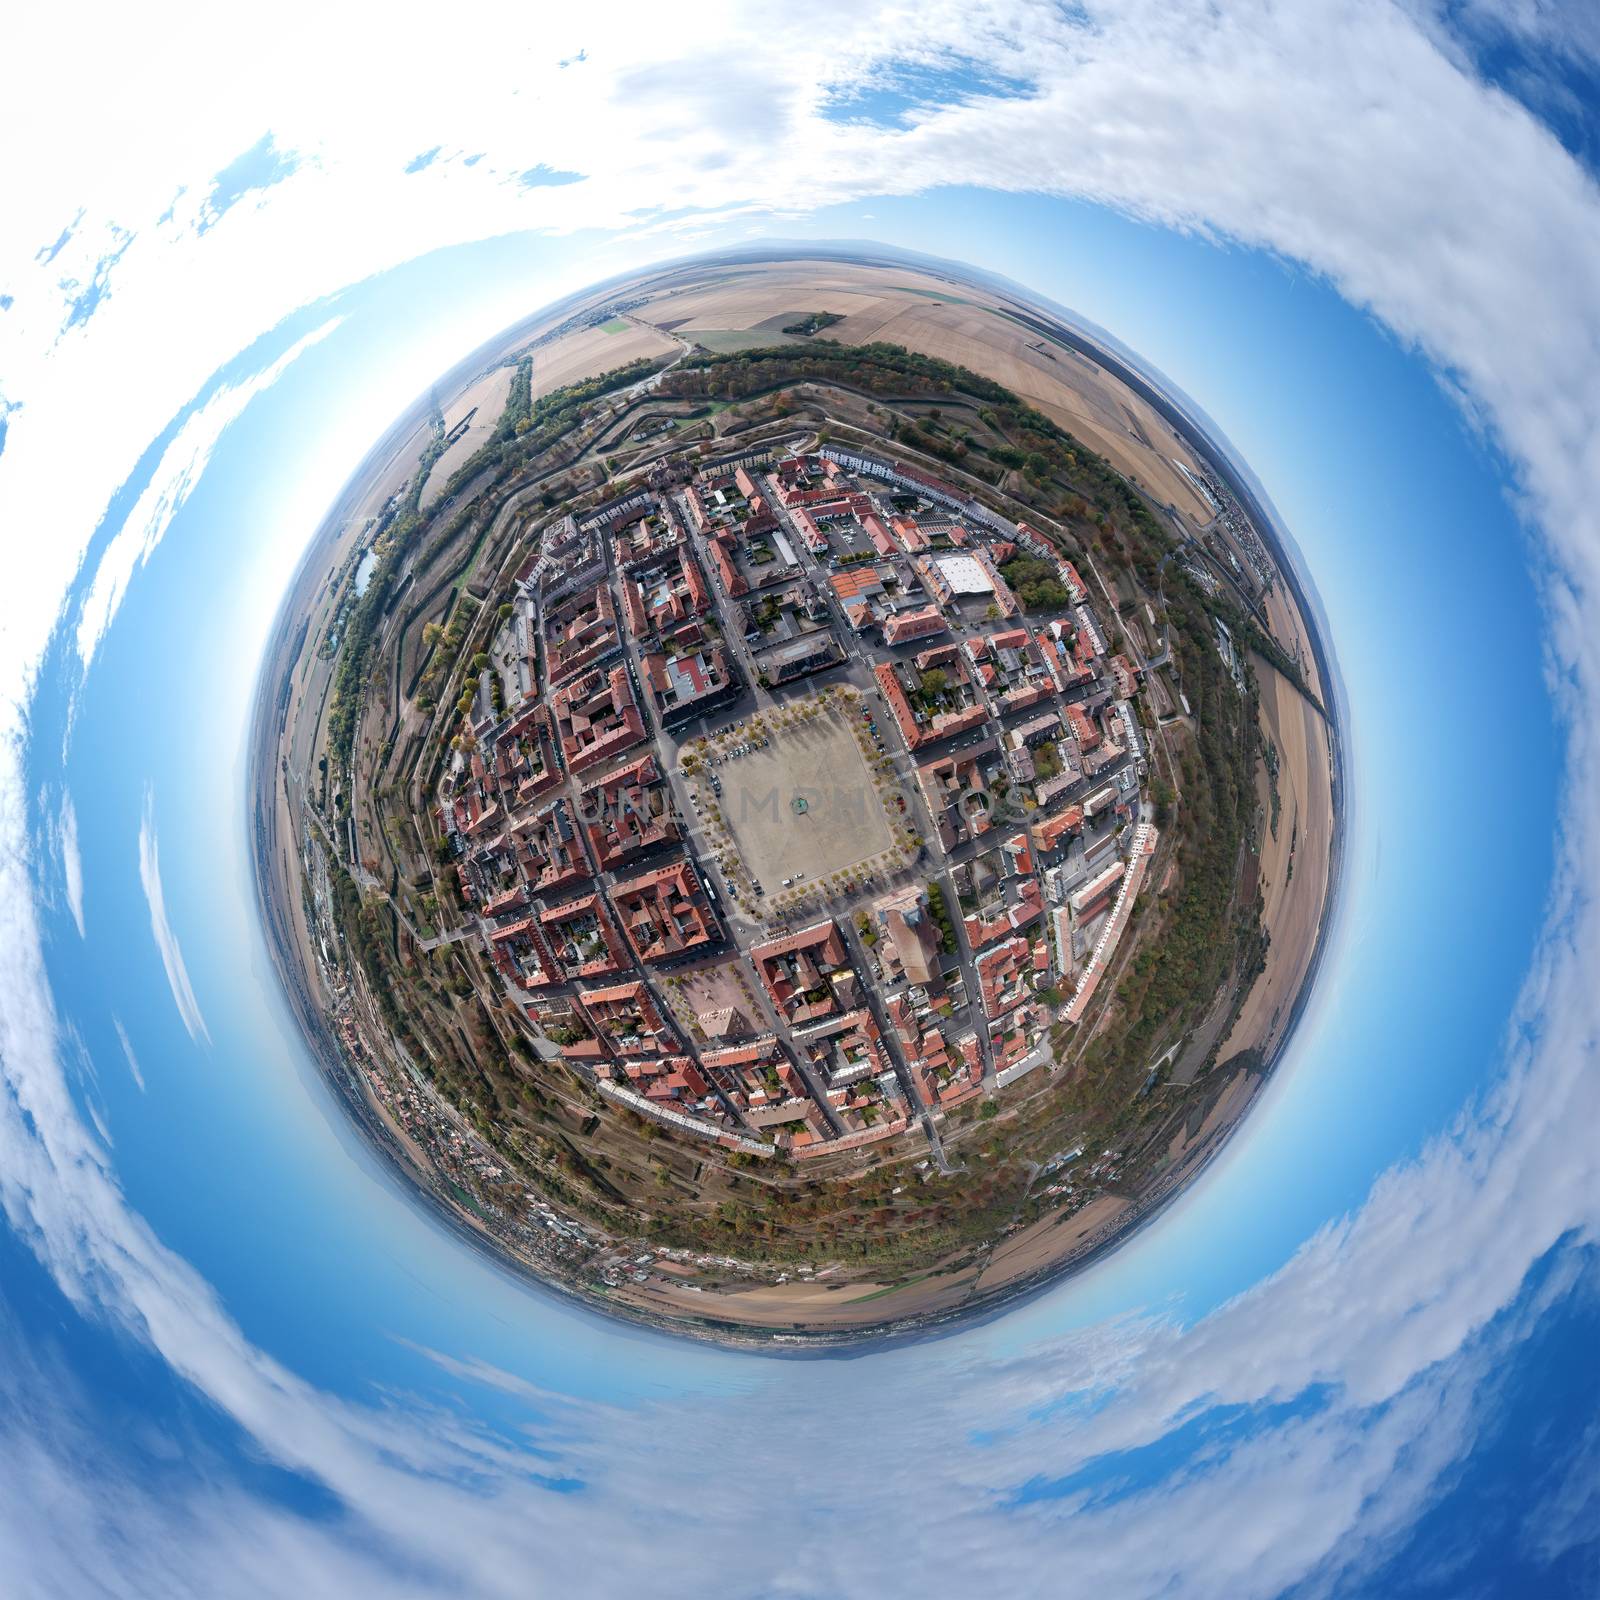 An image of a little planet panorama of Neuf Brisach Alsace France